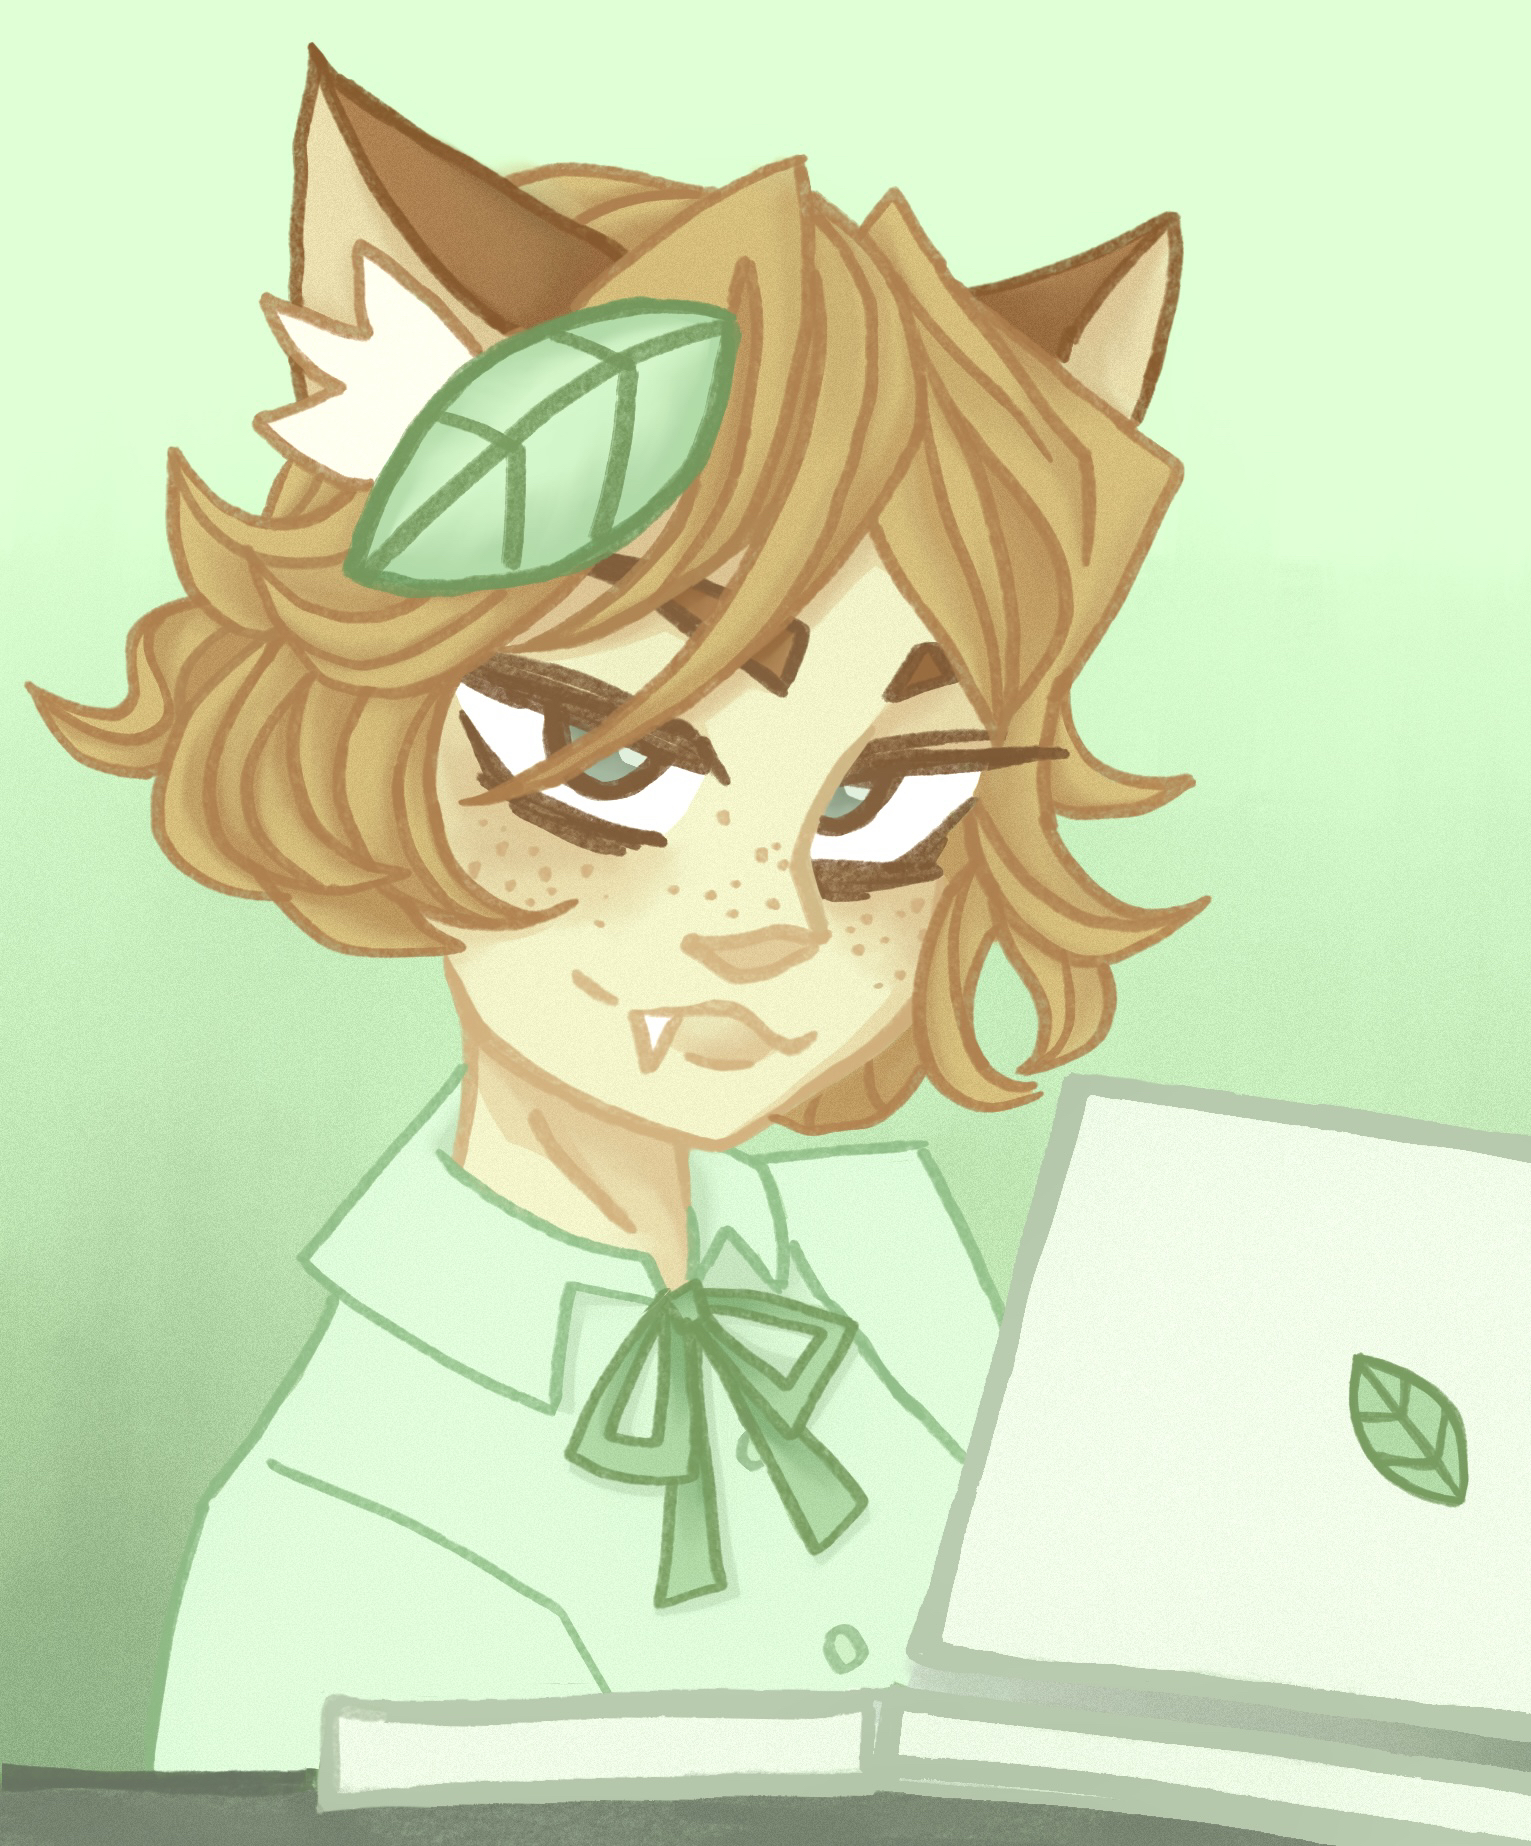 A headshot of a freckled catgirl with a basil leaf in her messy light brown hair behind a counter with a white laptop with the same basil leaf on it. She's wearing a light green collared shirt, with a green piece of ribbon tied into a bow around her collar. SHe is grinning, and a cat tooth is poking out.